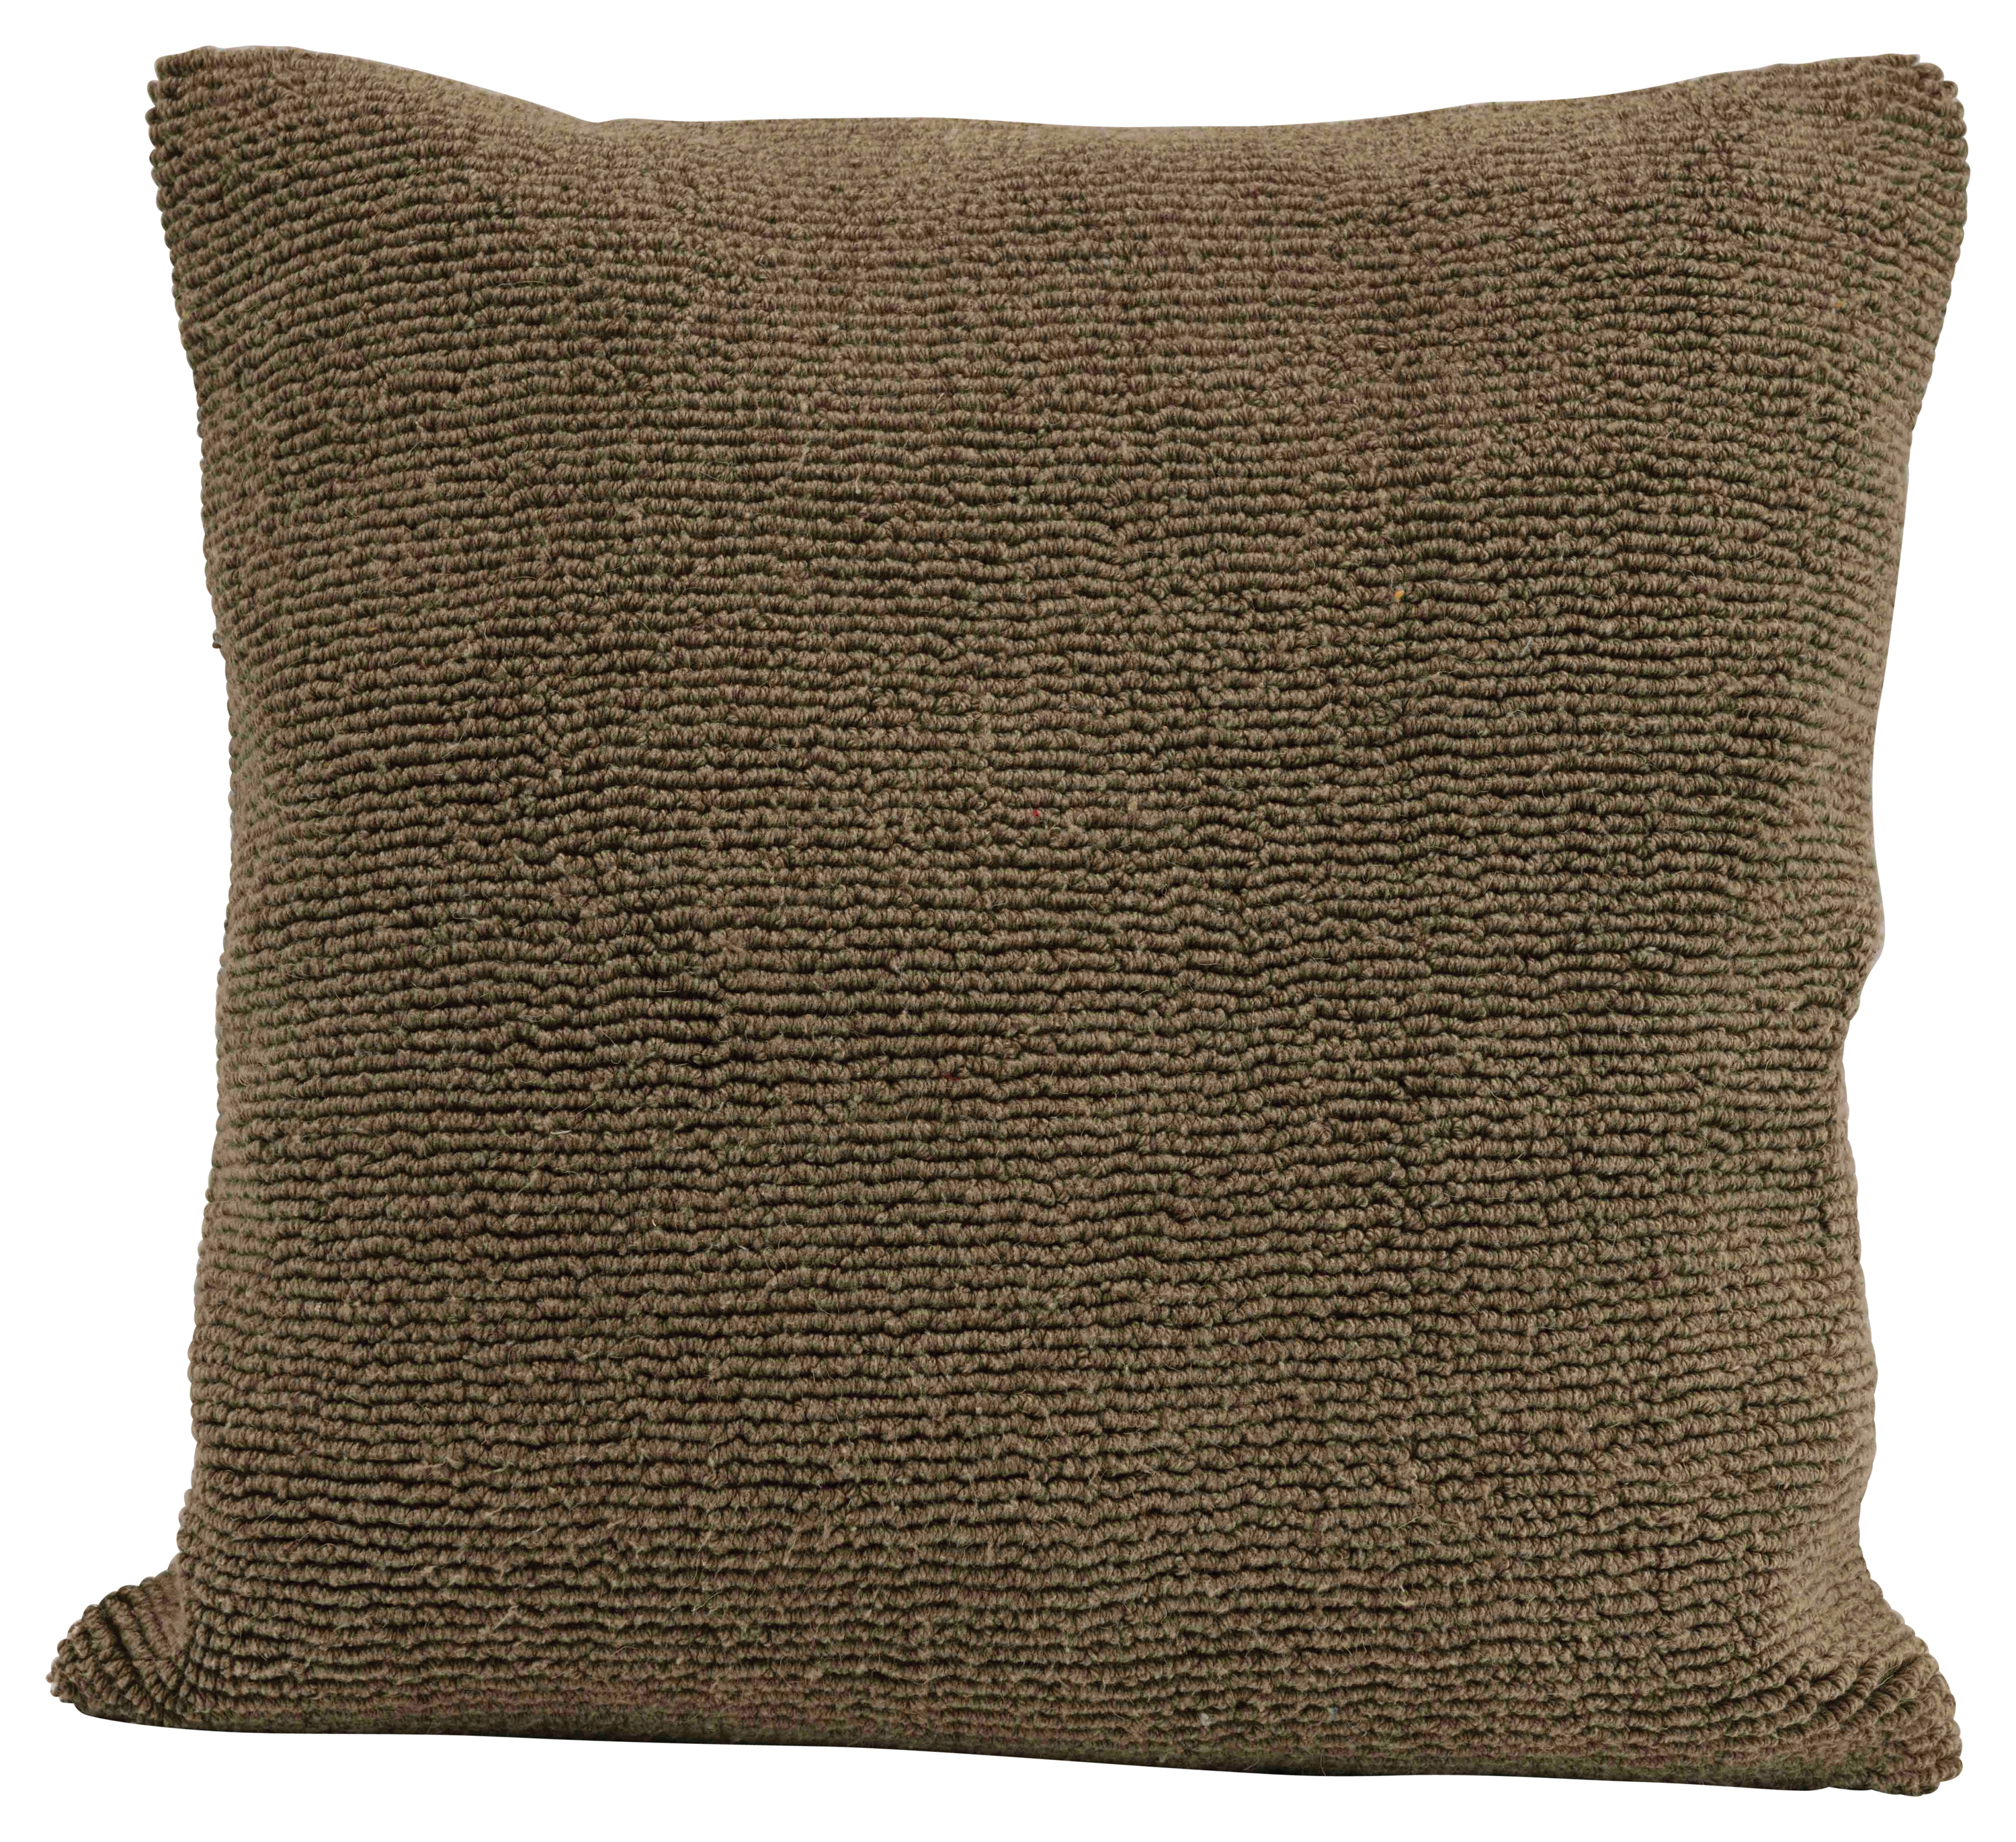 Square Acid Washed Cotton Pillow - Image 0